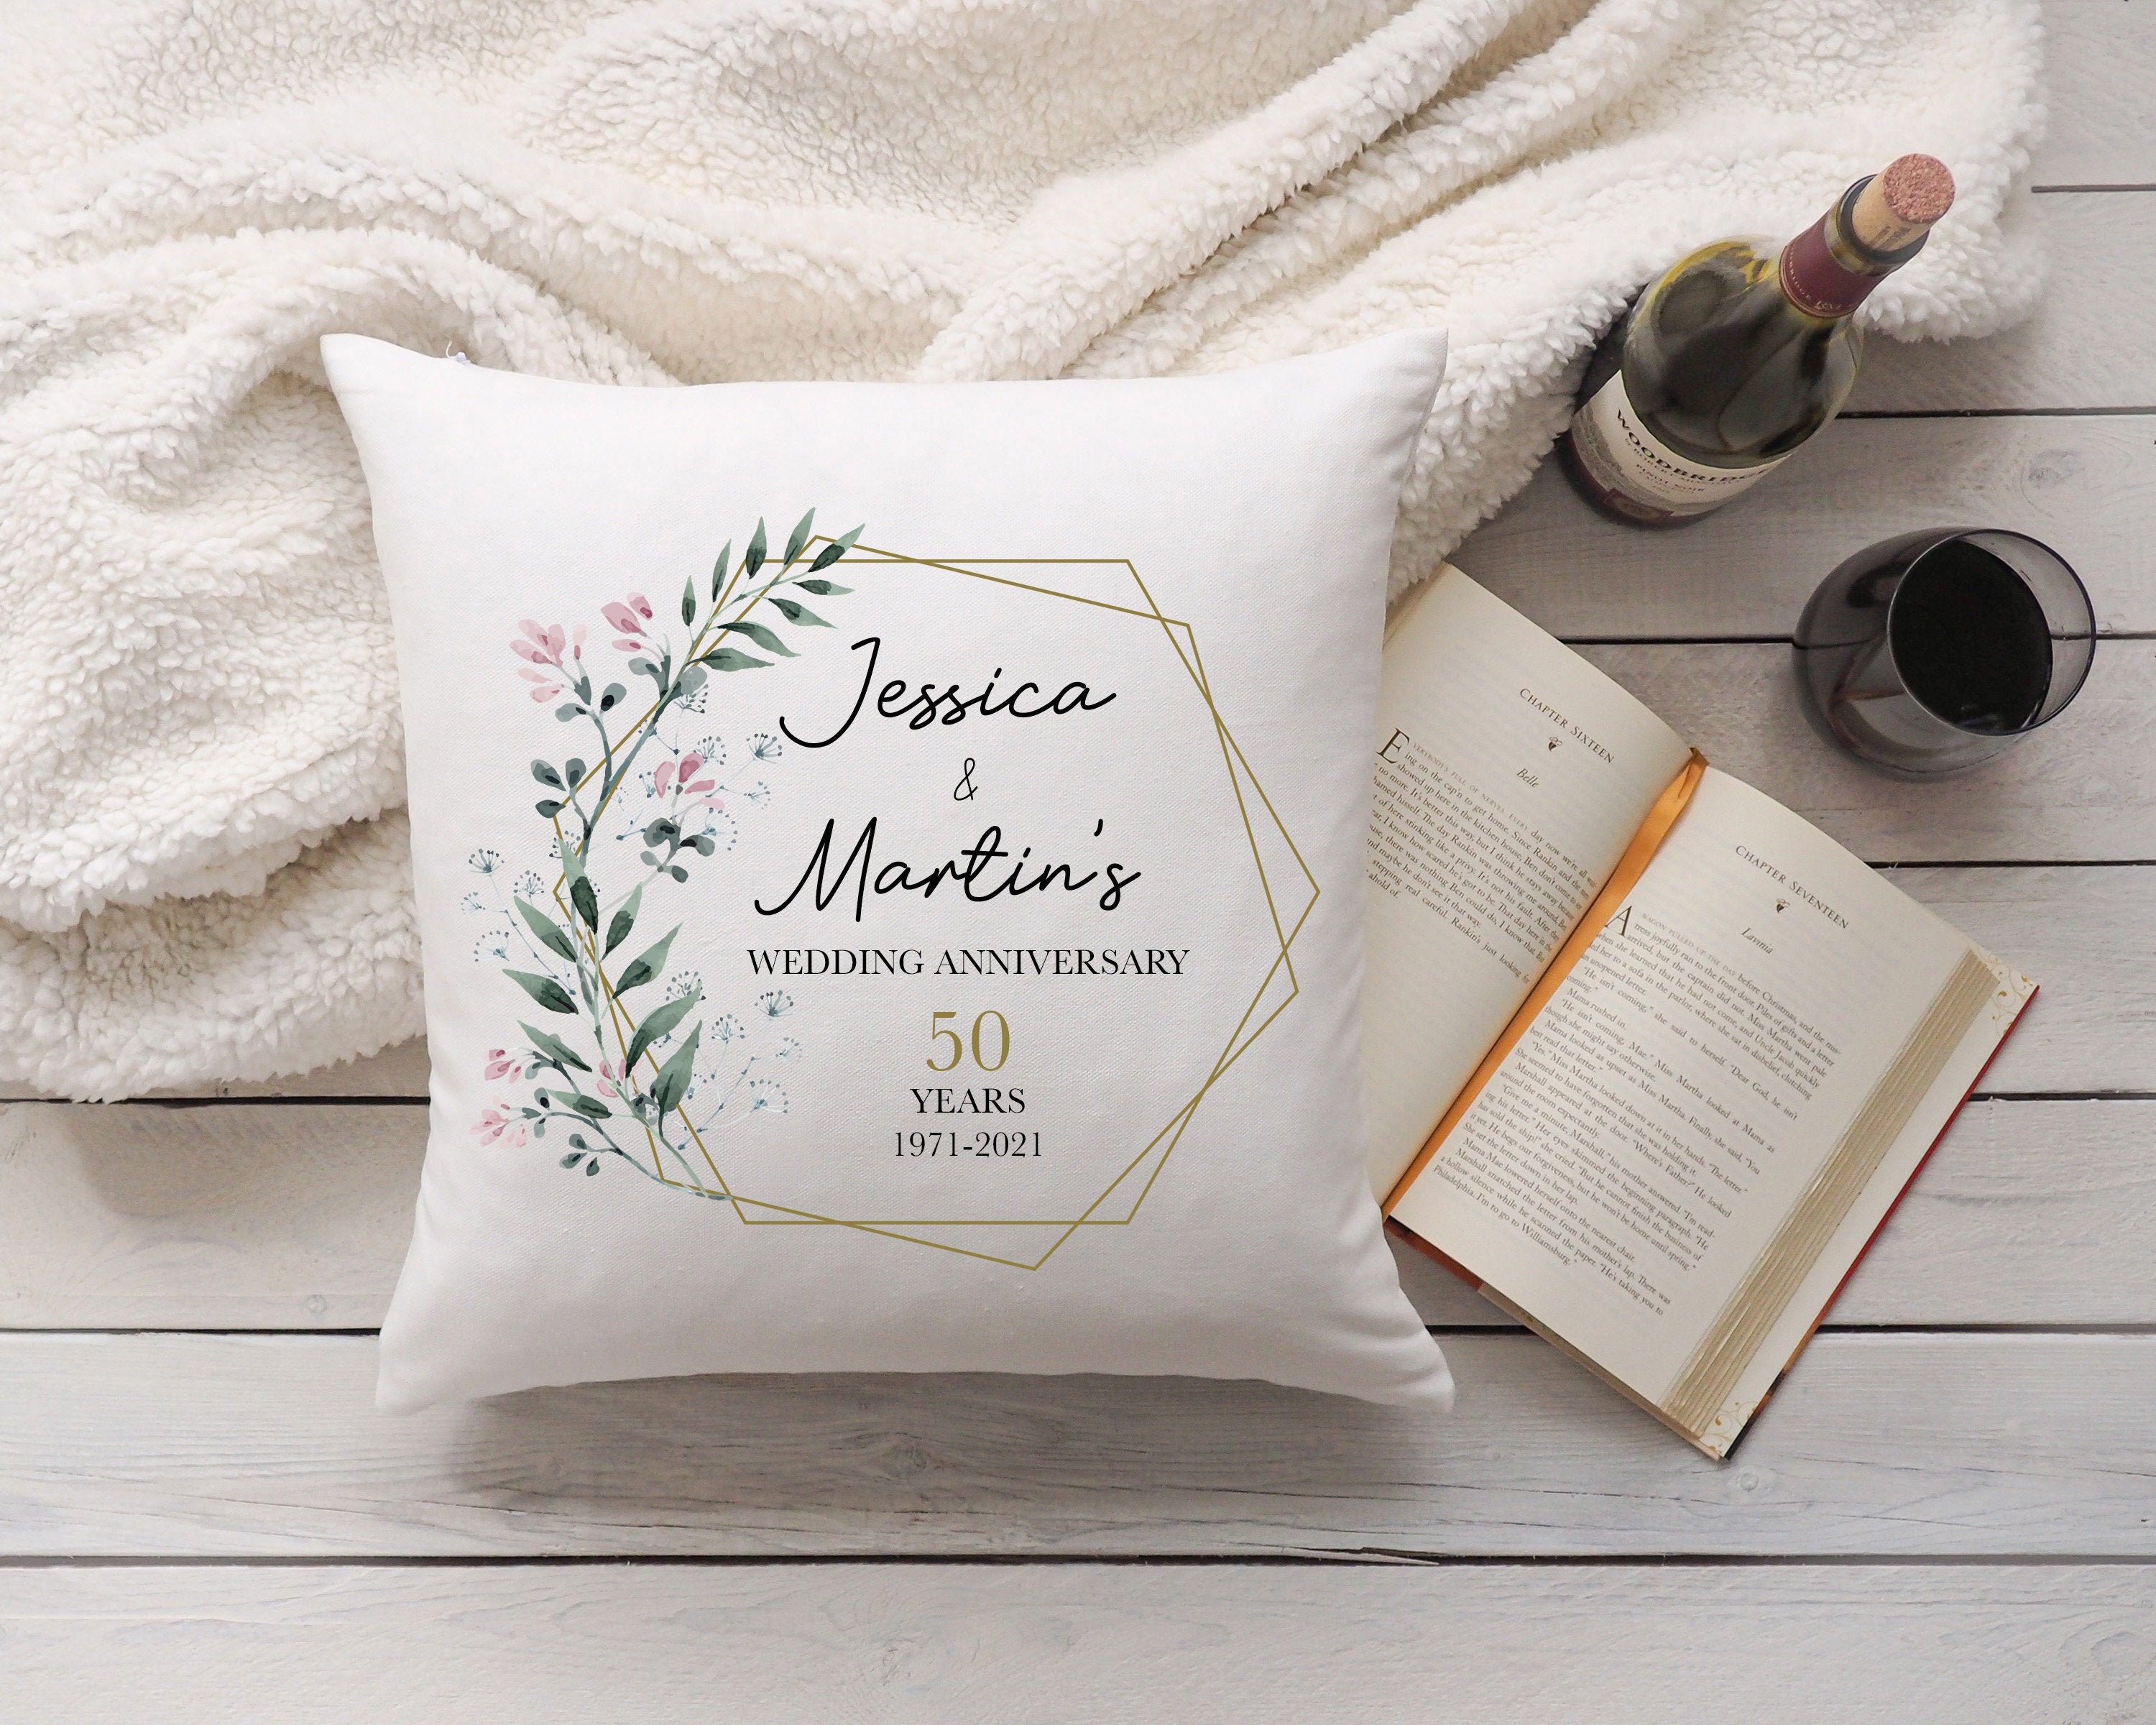 Personalised Cushion Pillow Cover Wedding Anniversary Gift 18x18 Inch Mr and Mrs Gifts for Him and Her 